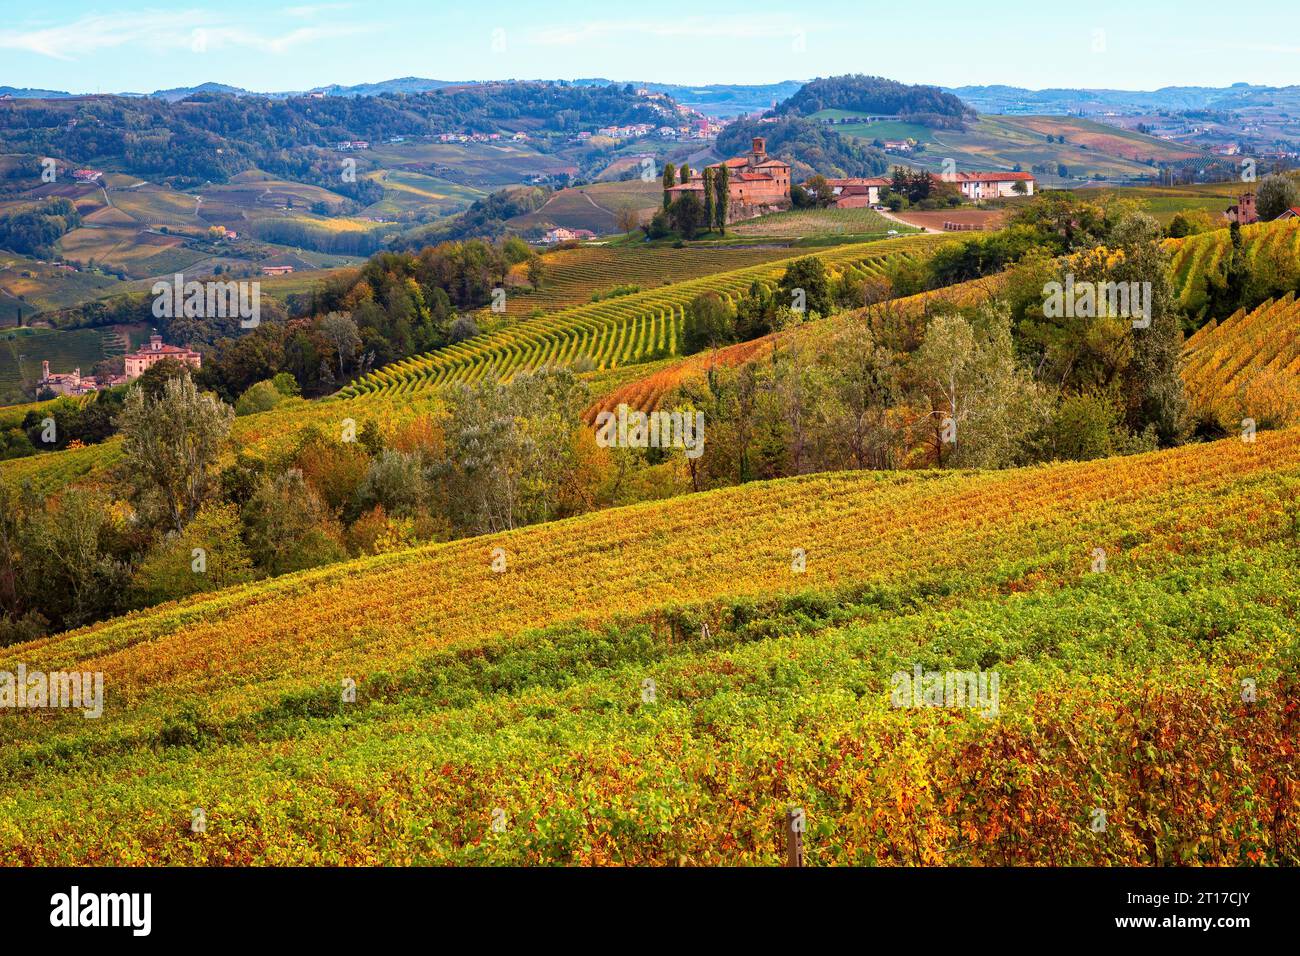 View of the beautiful hills with autumnal vineyards near Barolo in Piedmont, Italy. Stock Photo